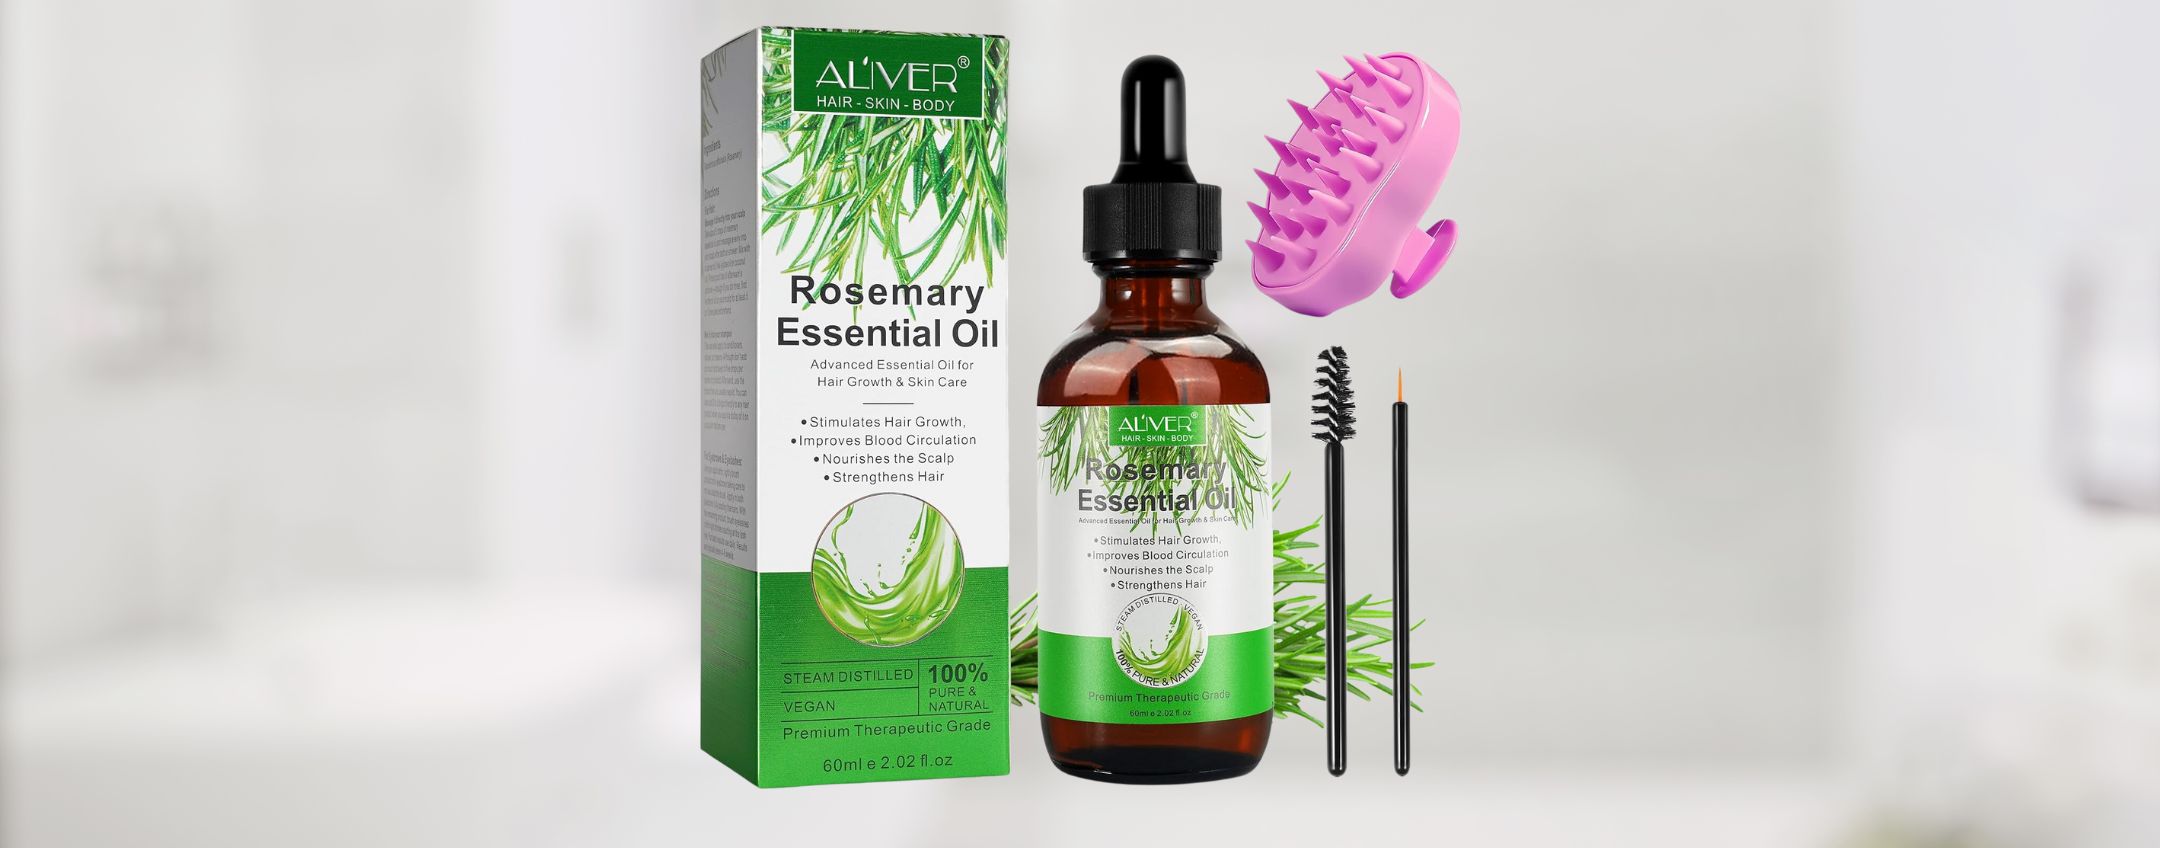 Rosemary oil for STRONGER hair on OFFER with a GIFT